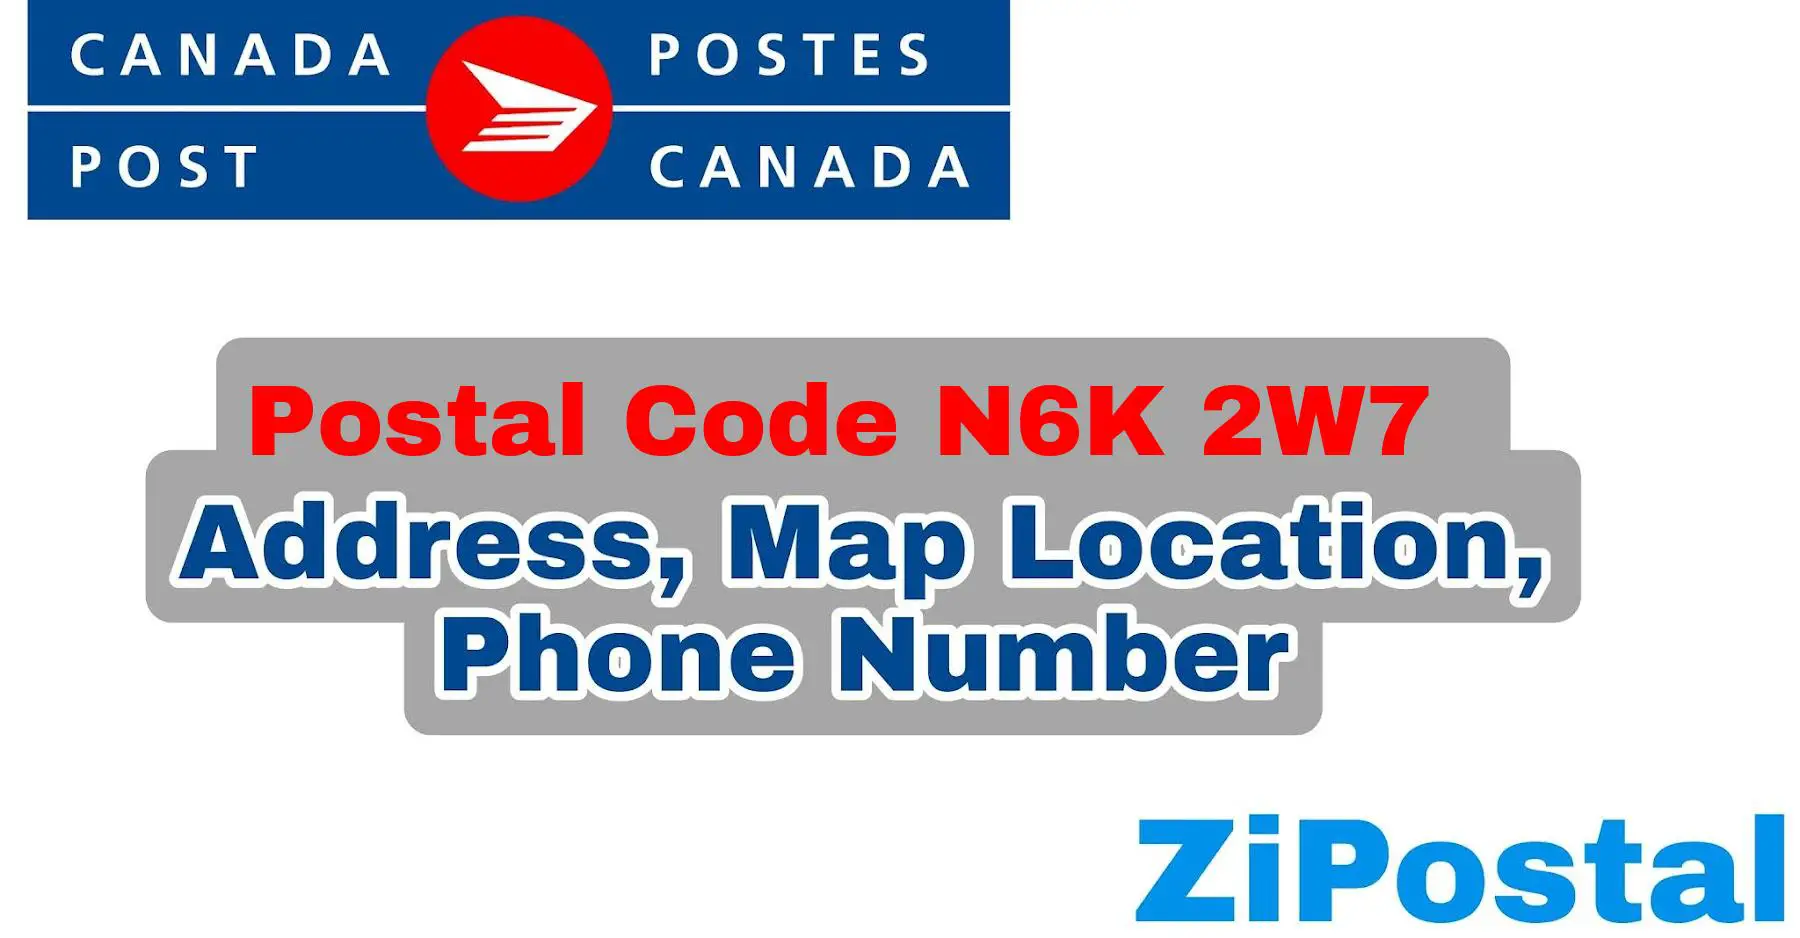 Postal Code N6K 2W7 Address Map Location and Phone Number